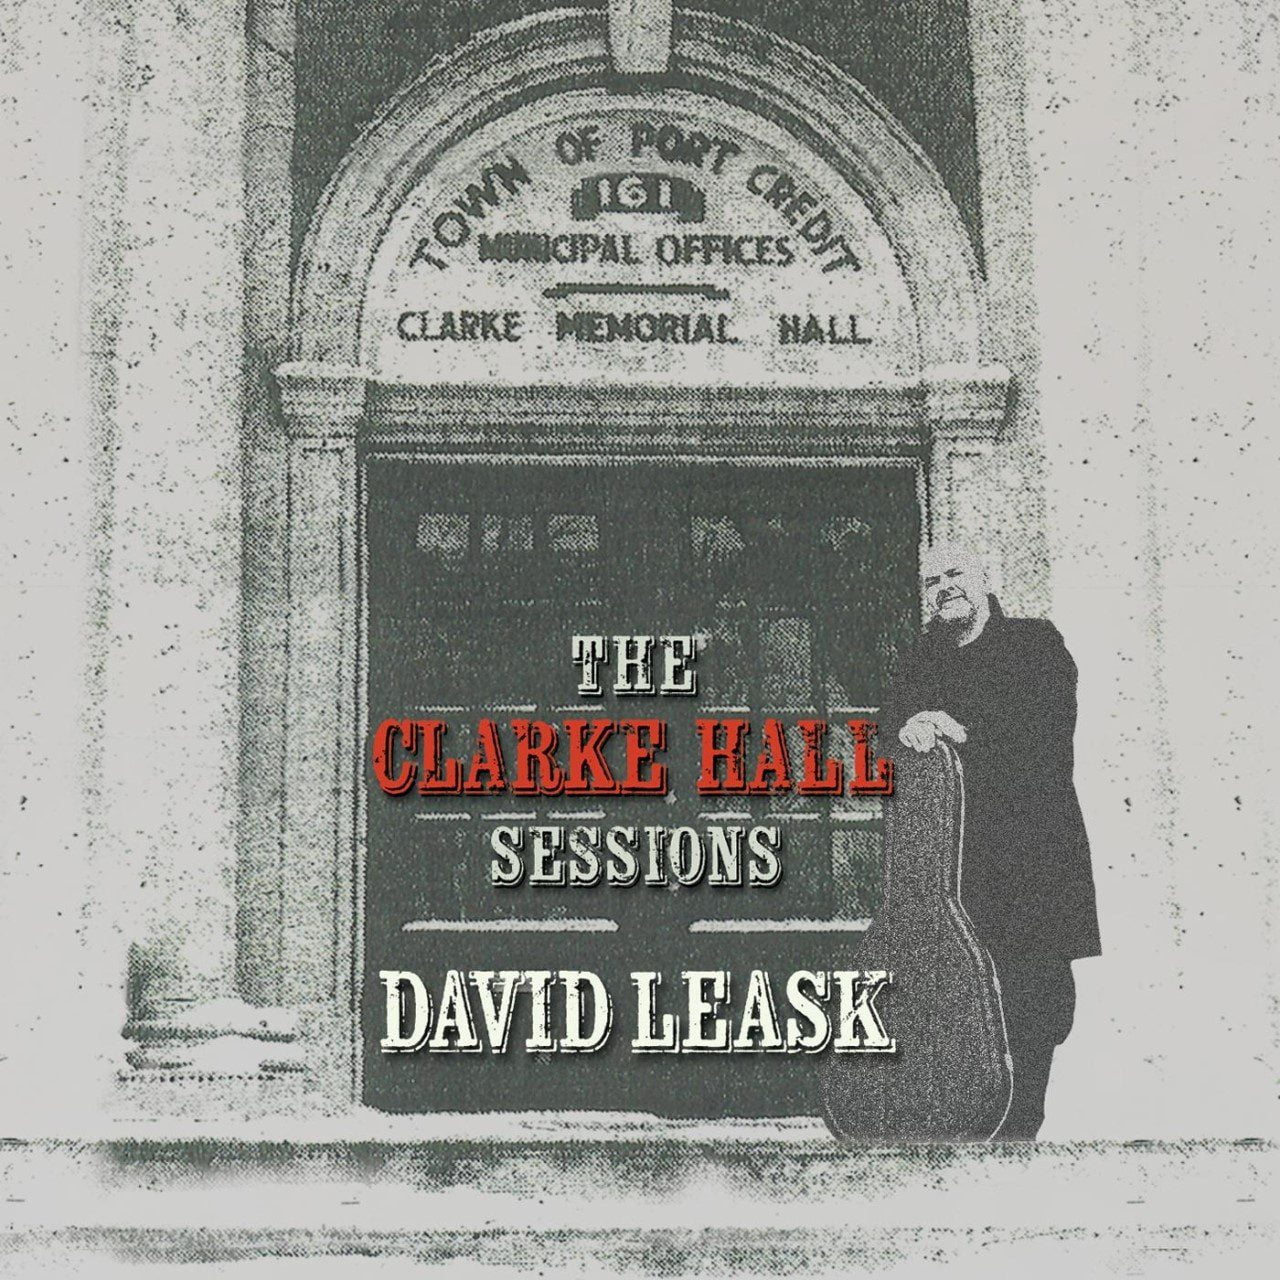 David Leask - The Clarke Hall Sessions cover album